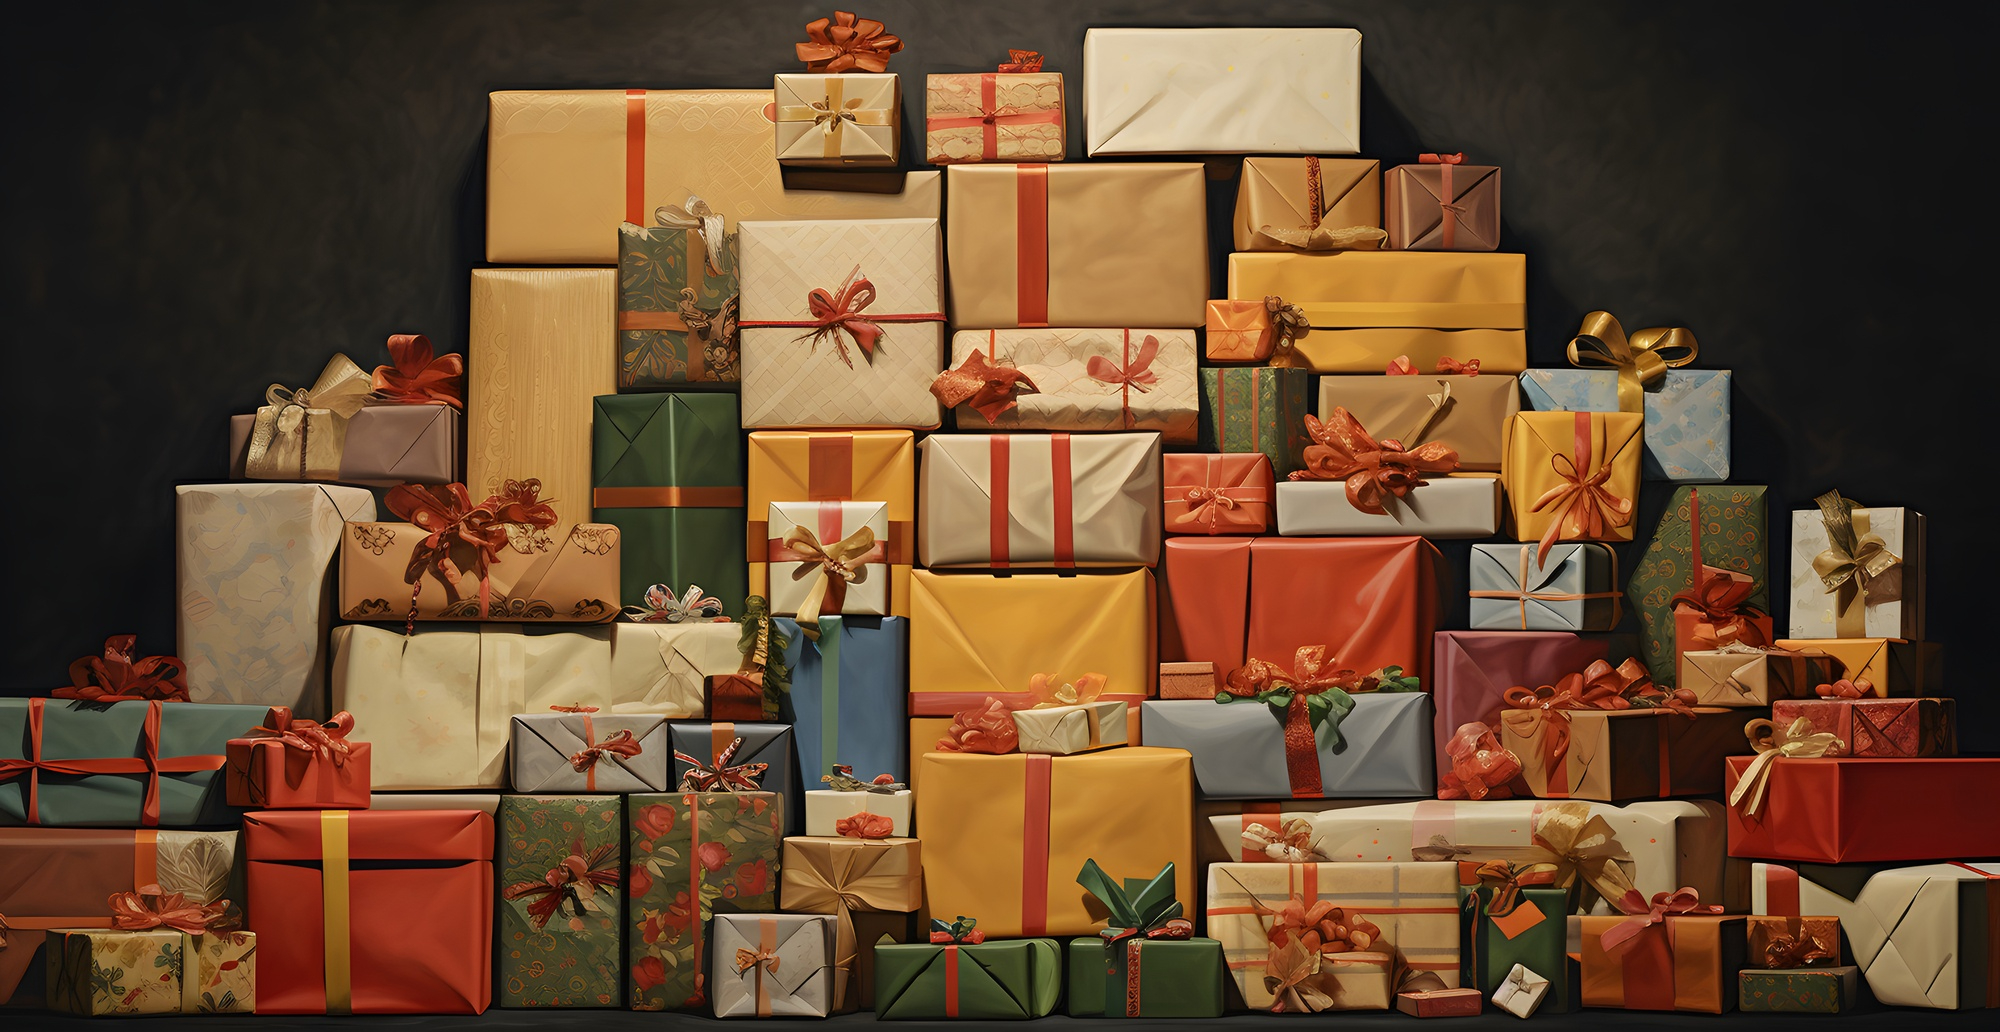 7 Reasons to Choose a Professional Corporate Gifting Company